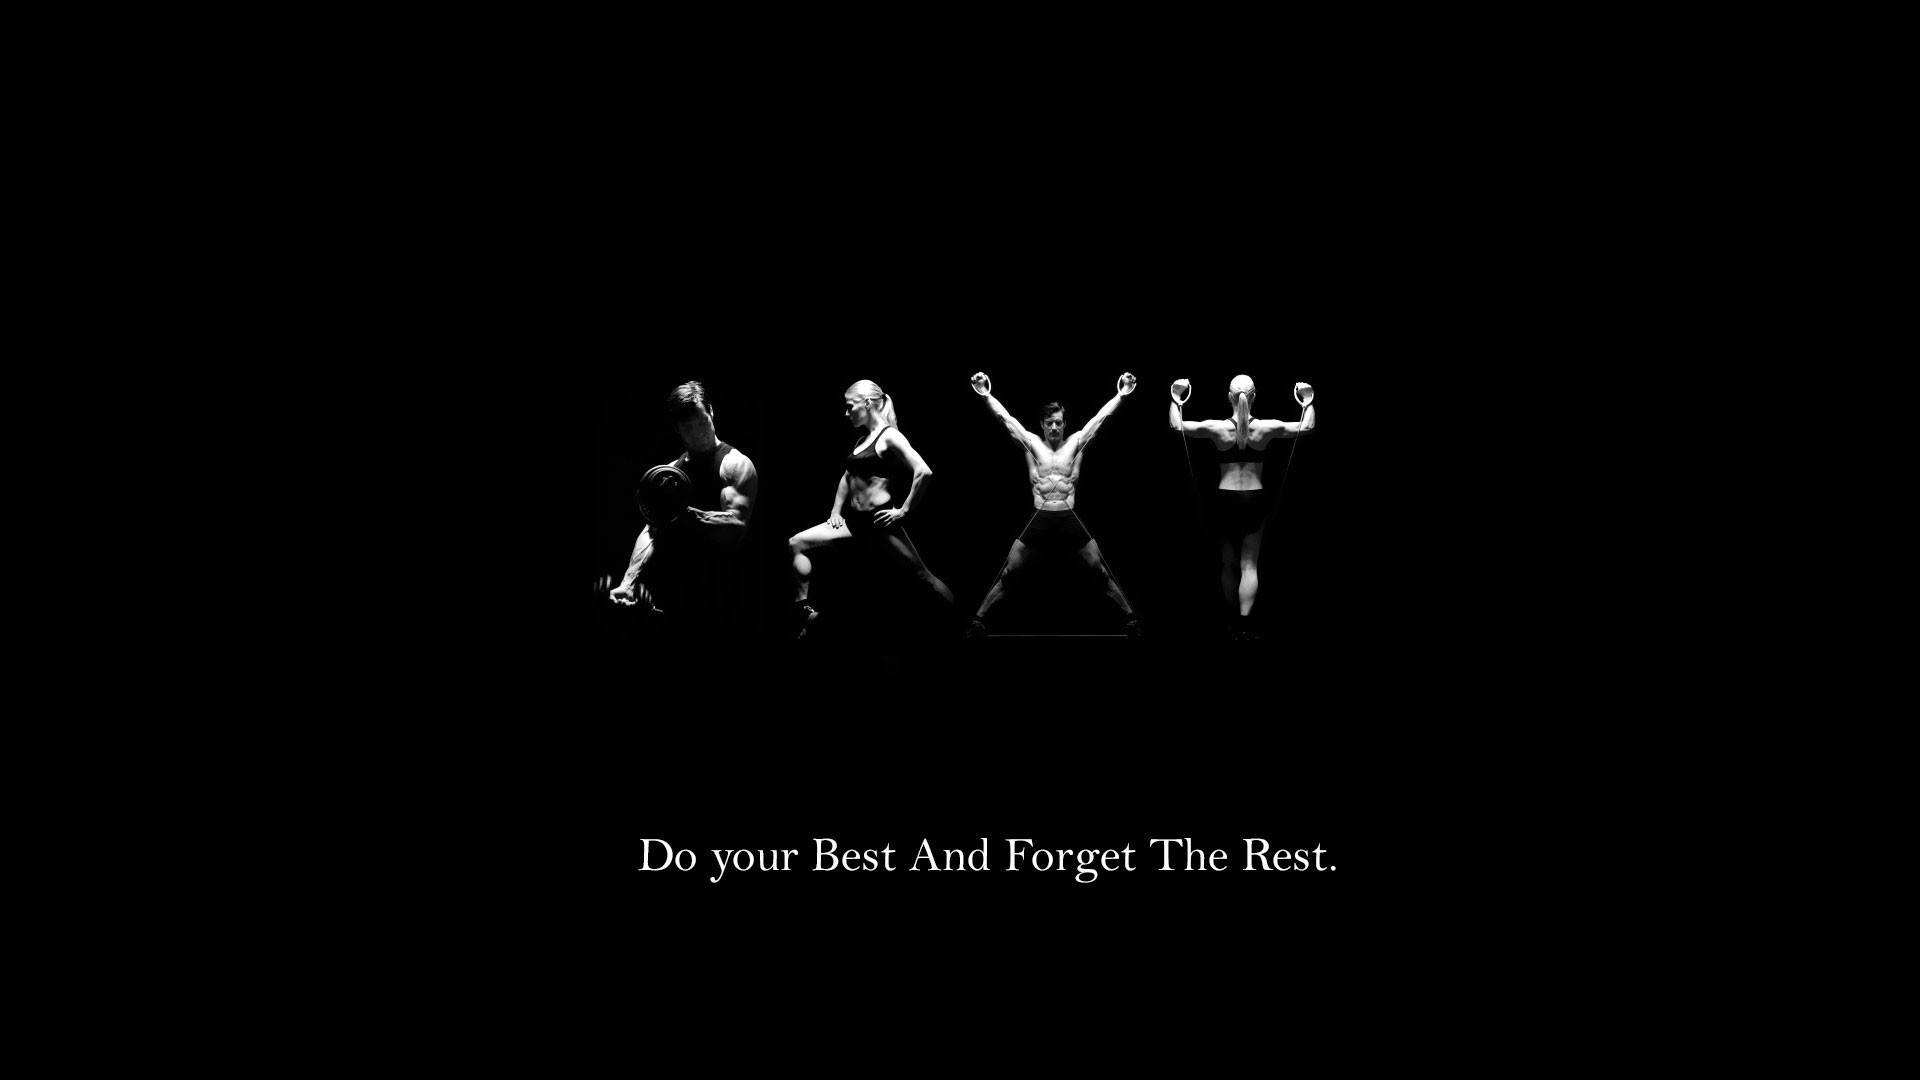 Download Exercises as Gym Motivation Wallpaper 